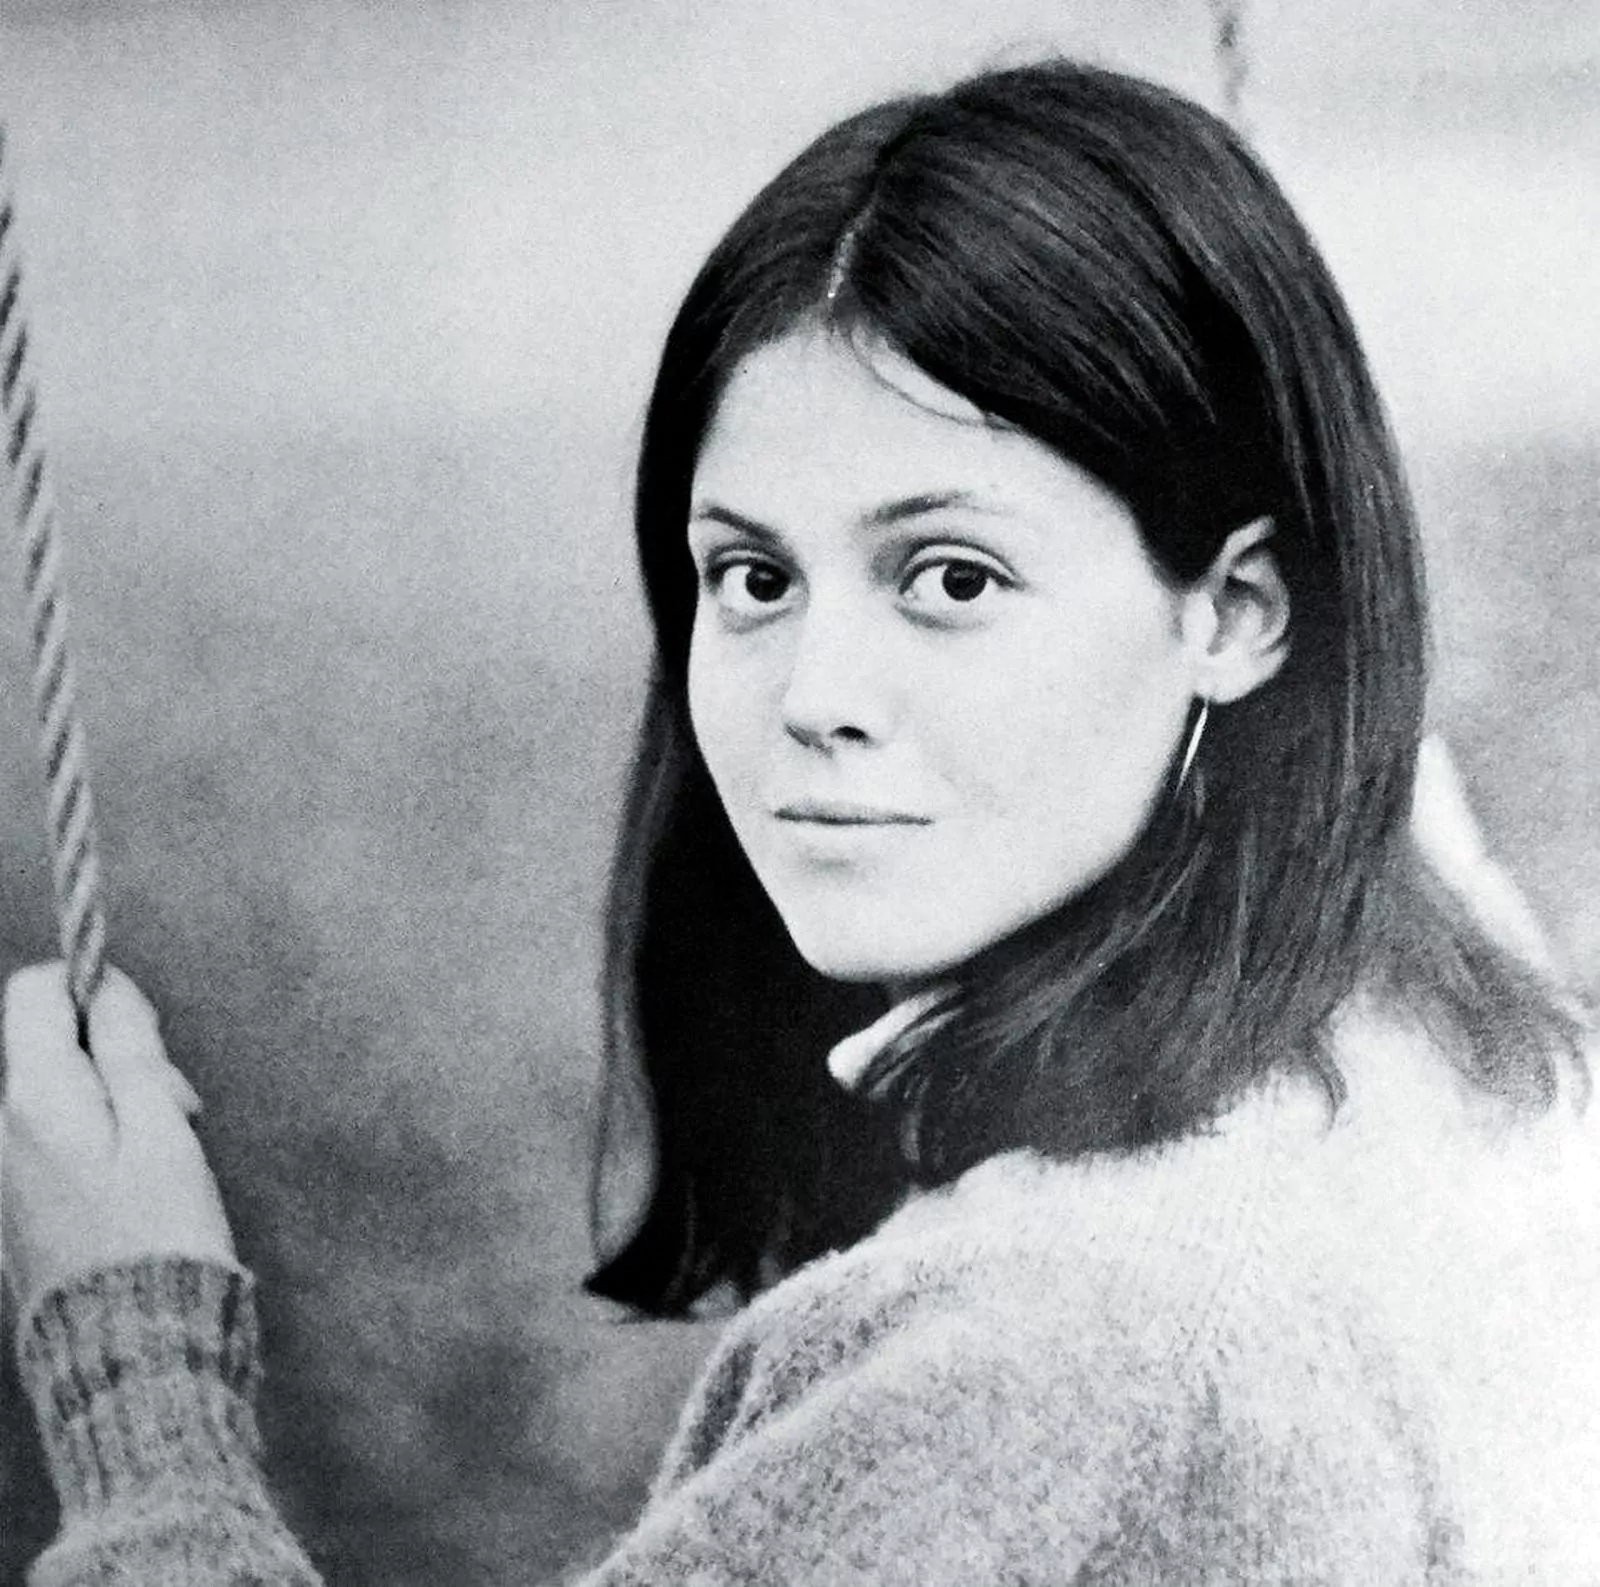 Sigourney Weaver in her youth